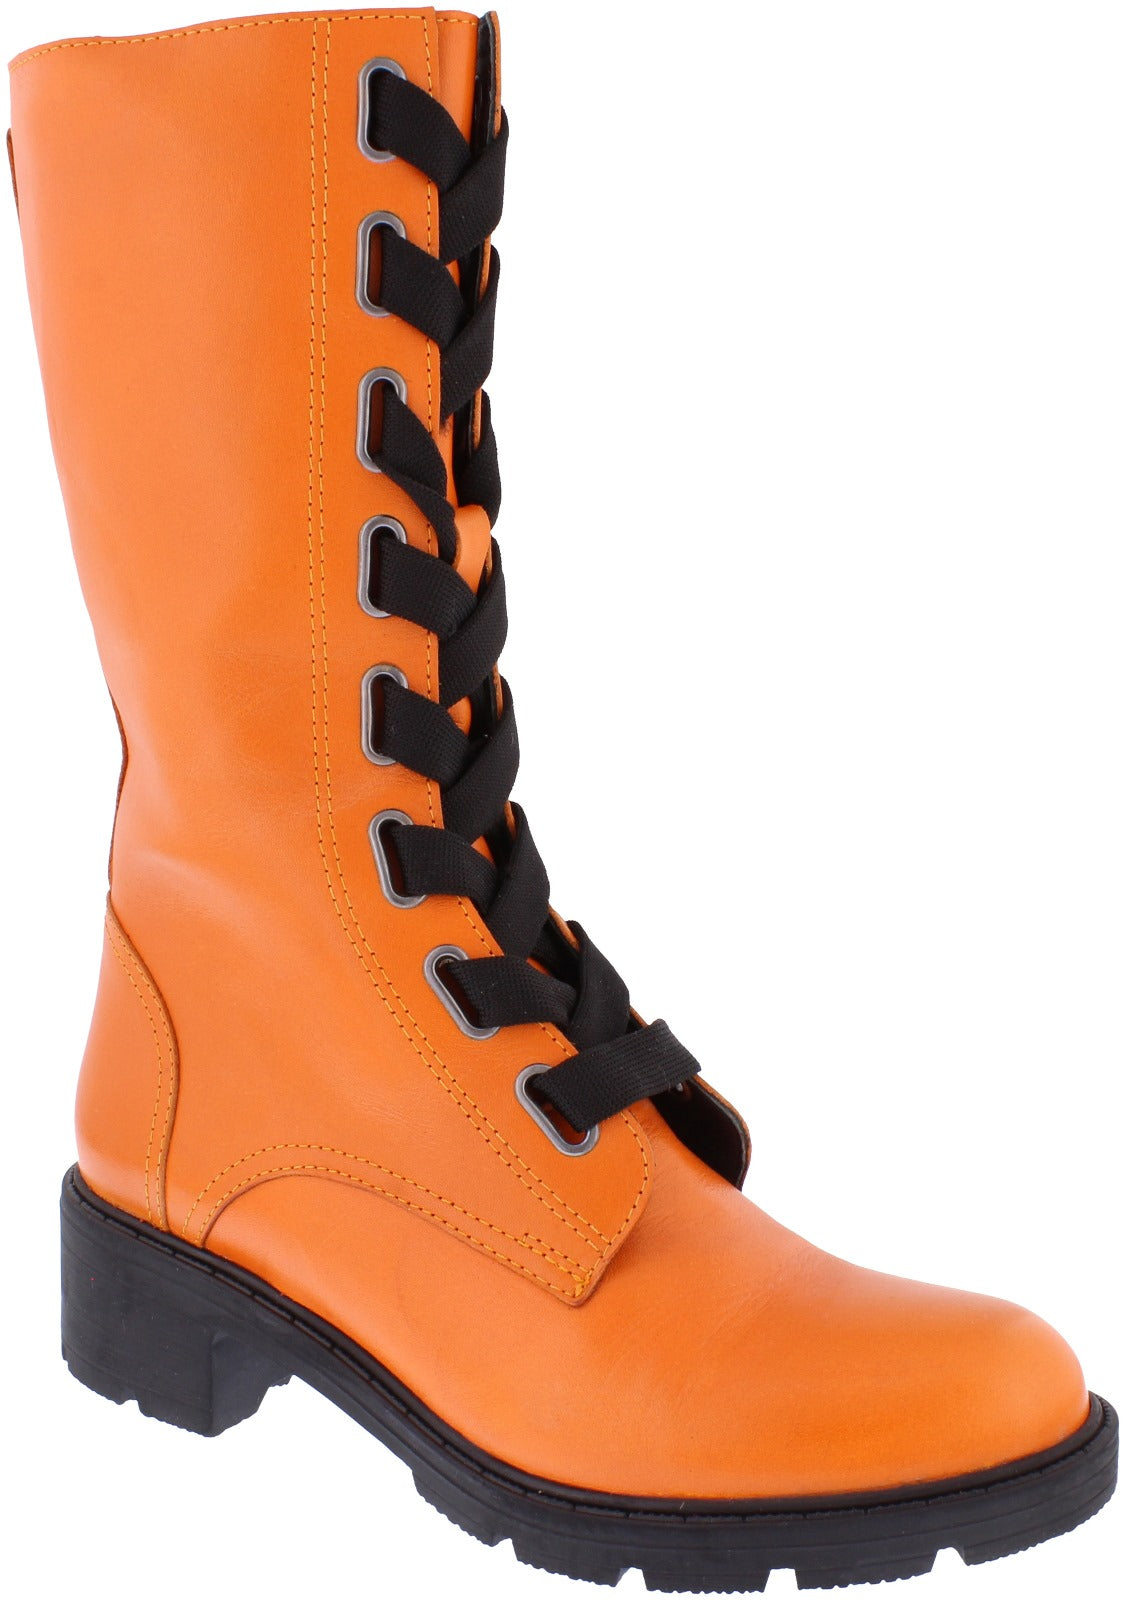 Adesso Roxy Pumpkin Leather Lace Up Mid Length Boot With Side zip